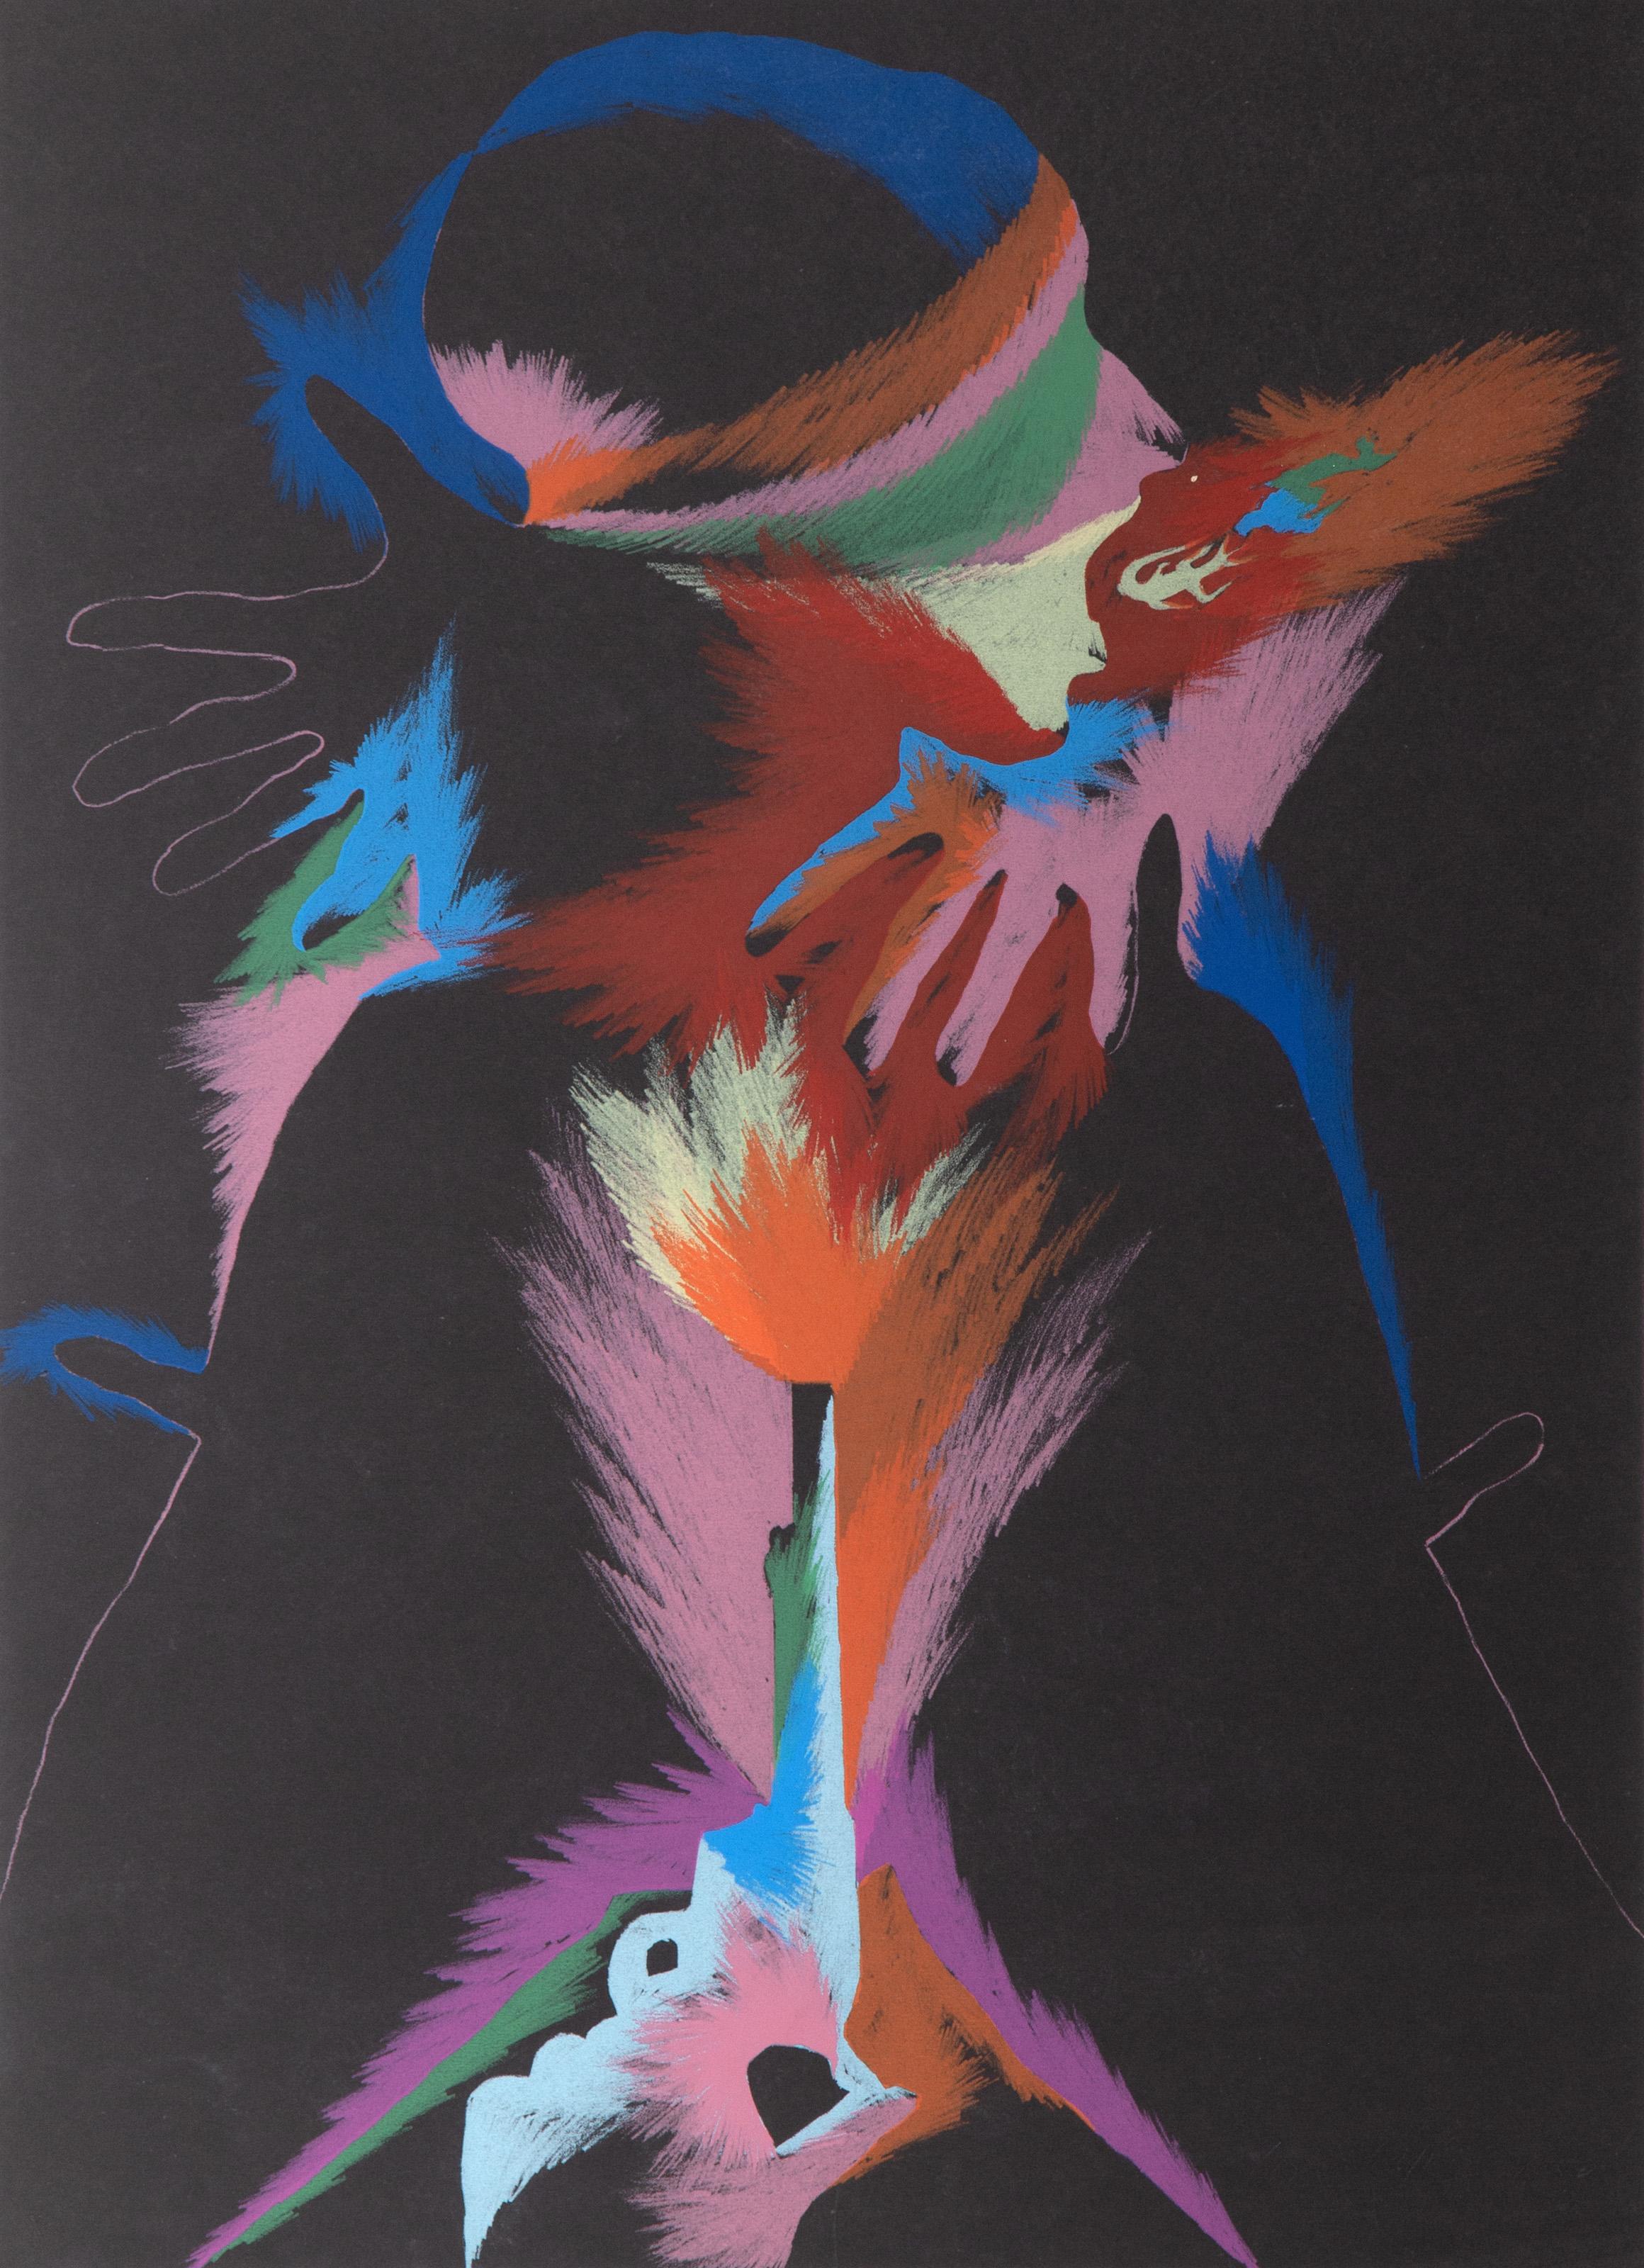 Fire
Marisol Escobar, French/Venezuelan (1930–2016)
Date: 1980
Lithograph, signed numbered and dated in pencil lower right
Edition of 15/200
Size: 30 x 21.75 in. (76.2 x 55.25 cm)